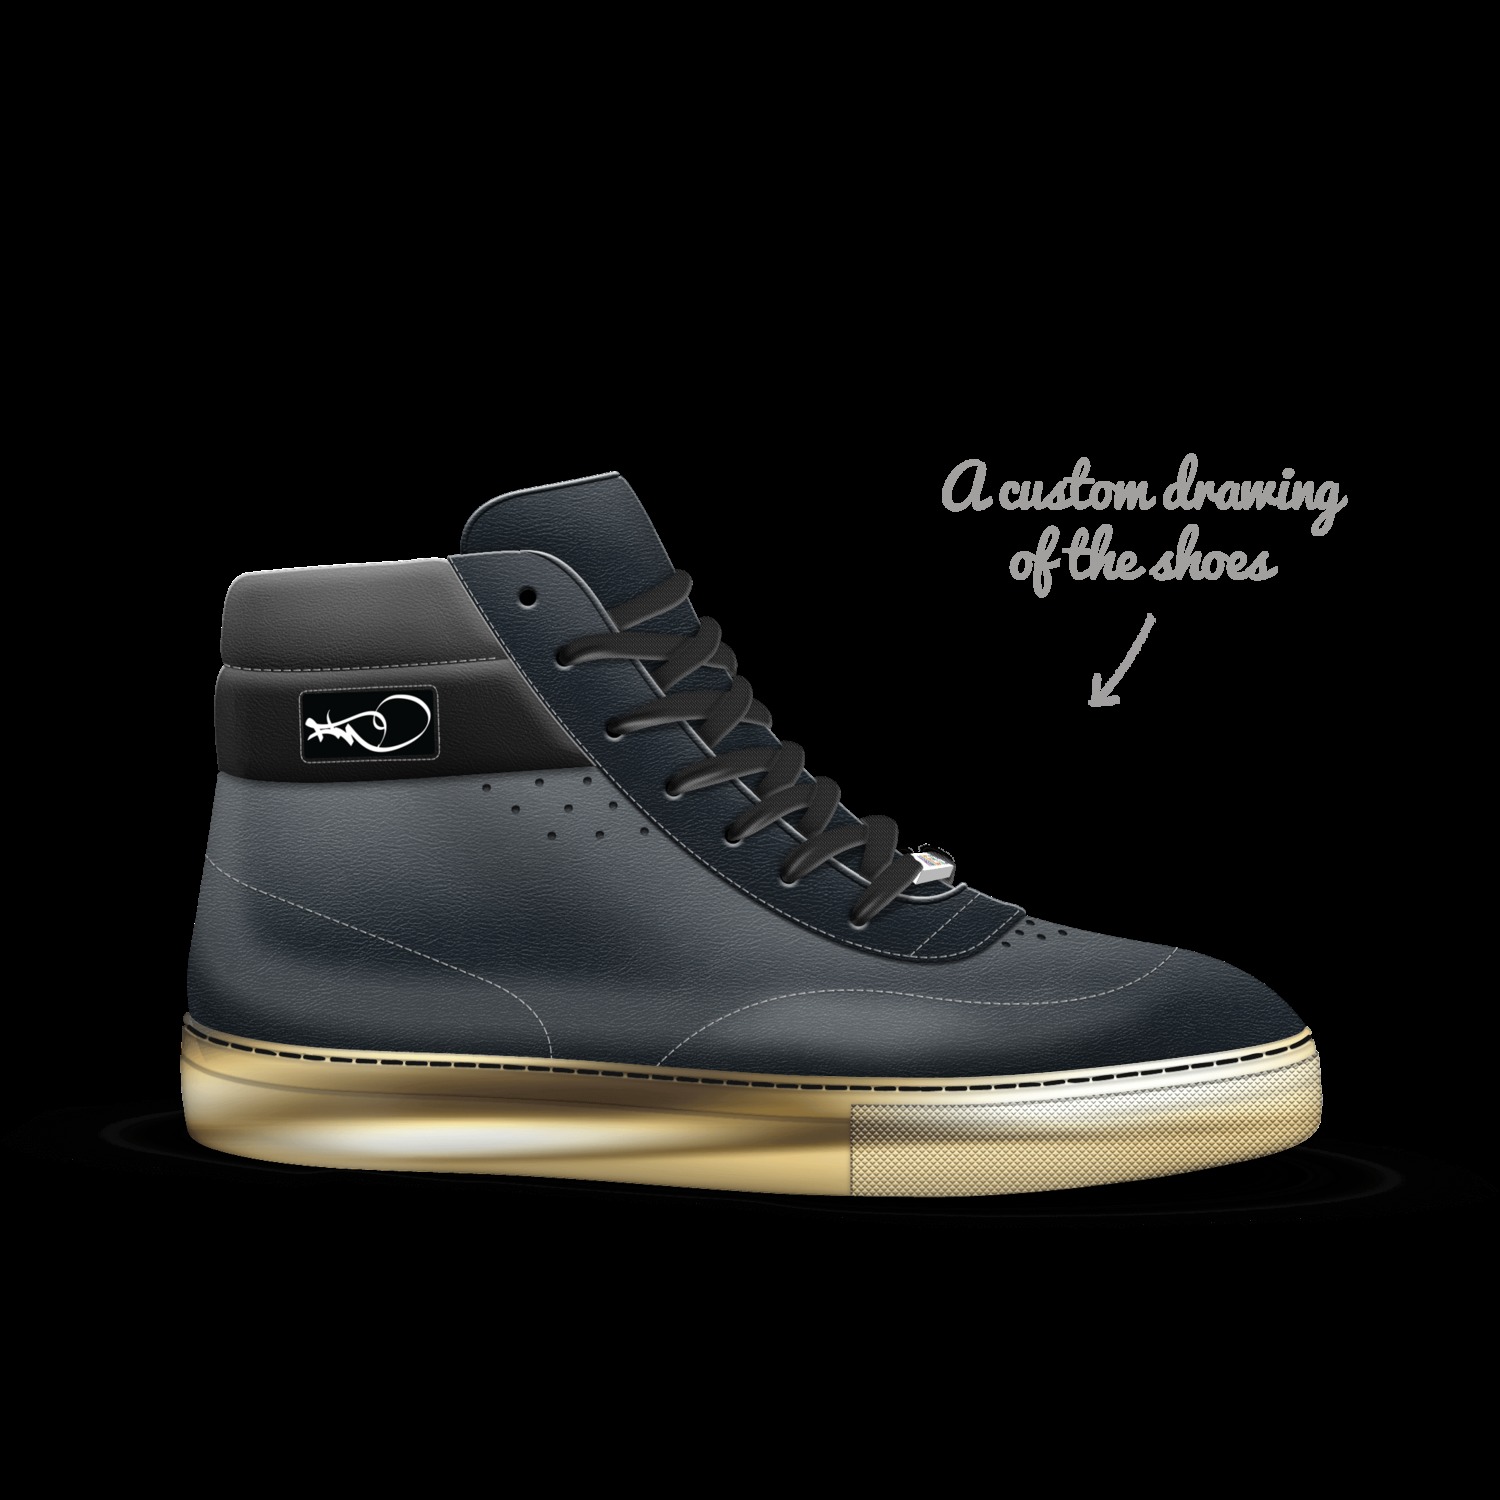 A Custom Shoe concept by Andre Whitmore